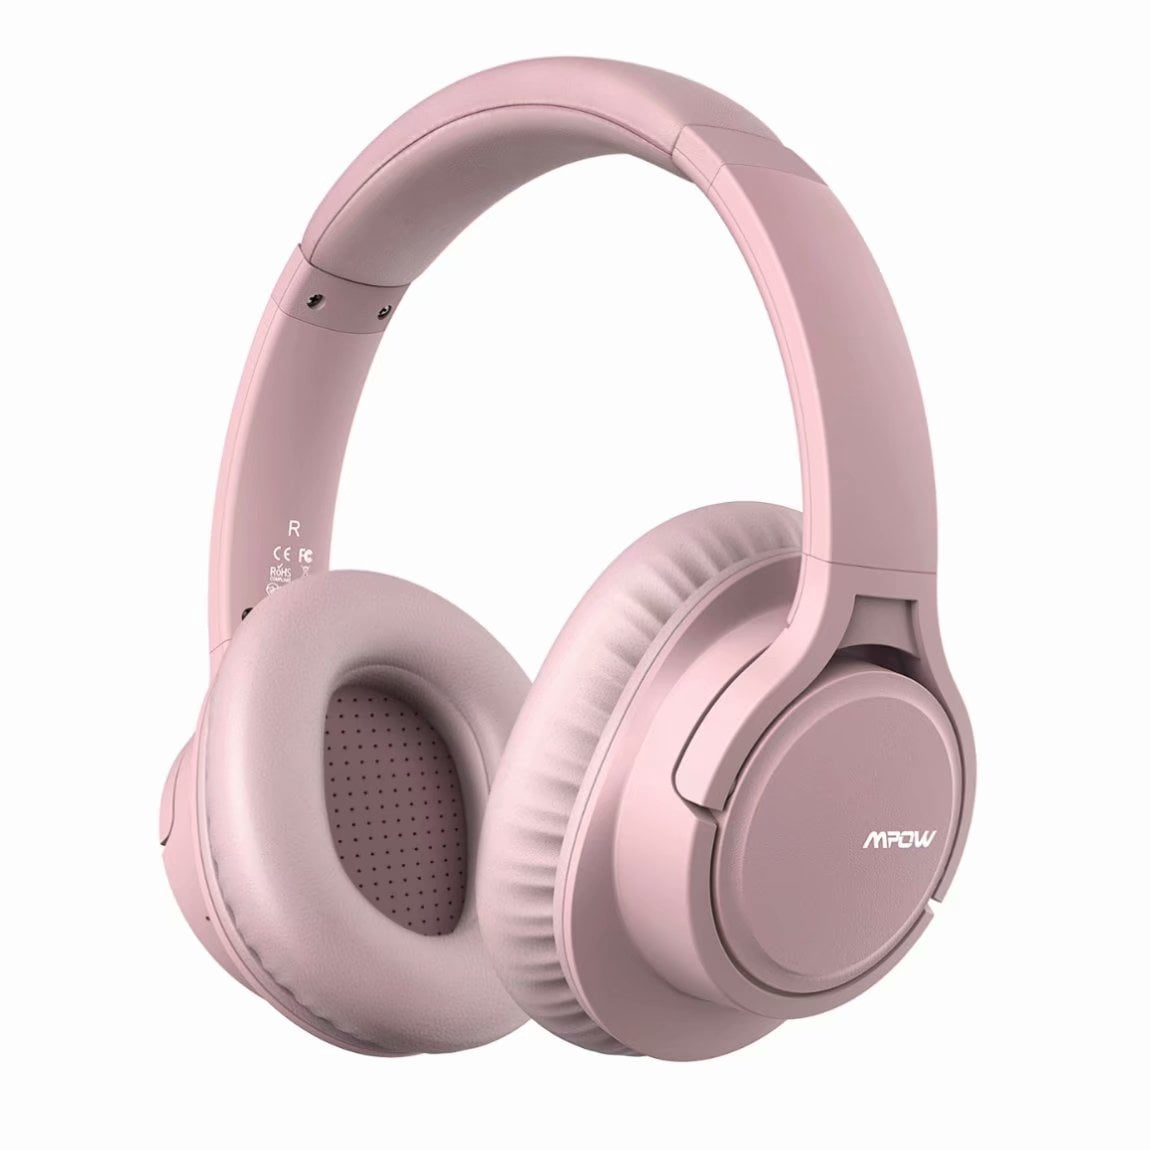 Compatible with Huawei Honor 9 Lite & Huawei P Smart Foldable Headphone Headset with FM Radio and Mic DURAGADGET Rose Gold Wireless